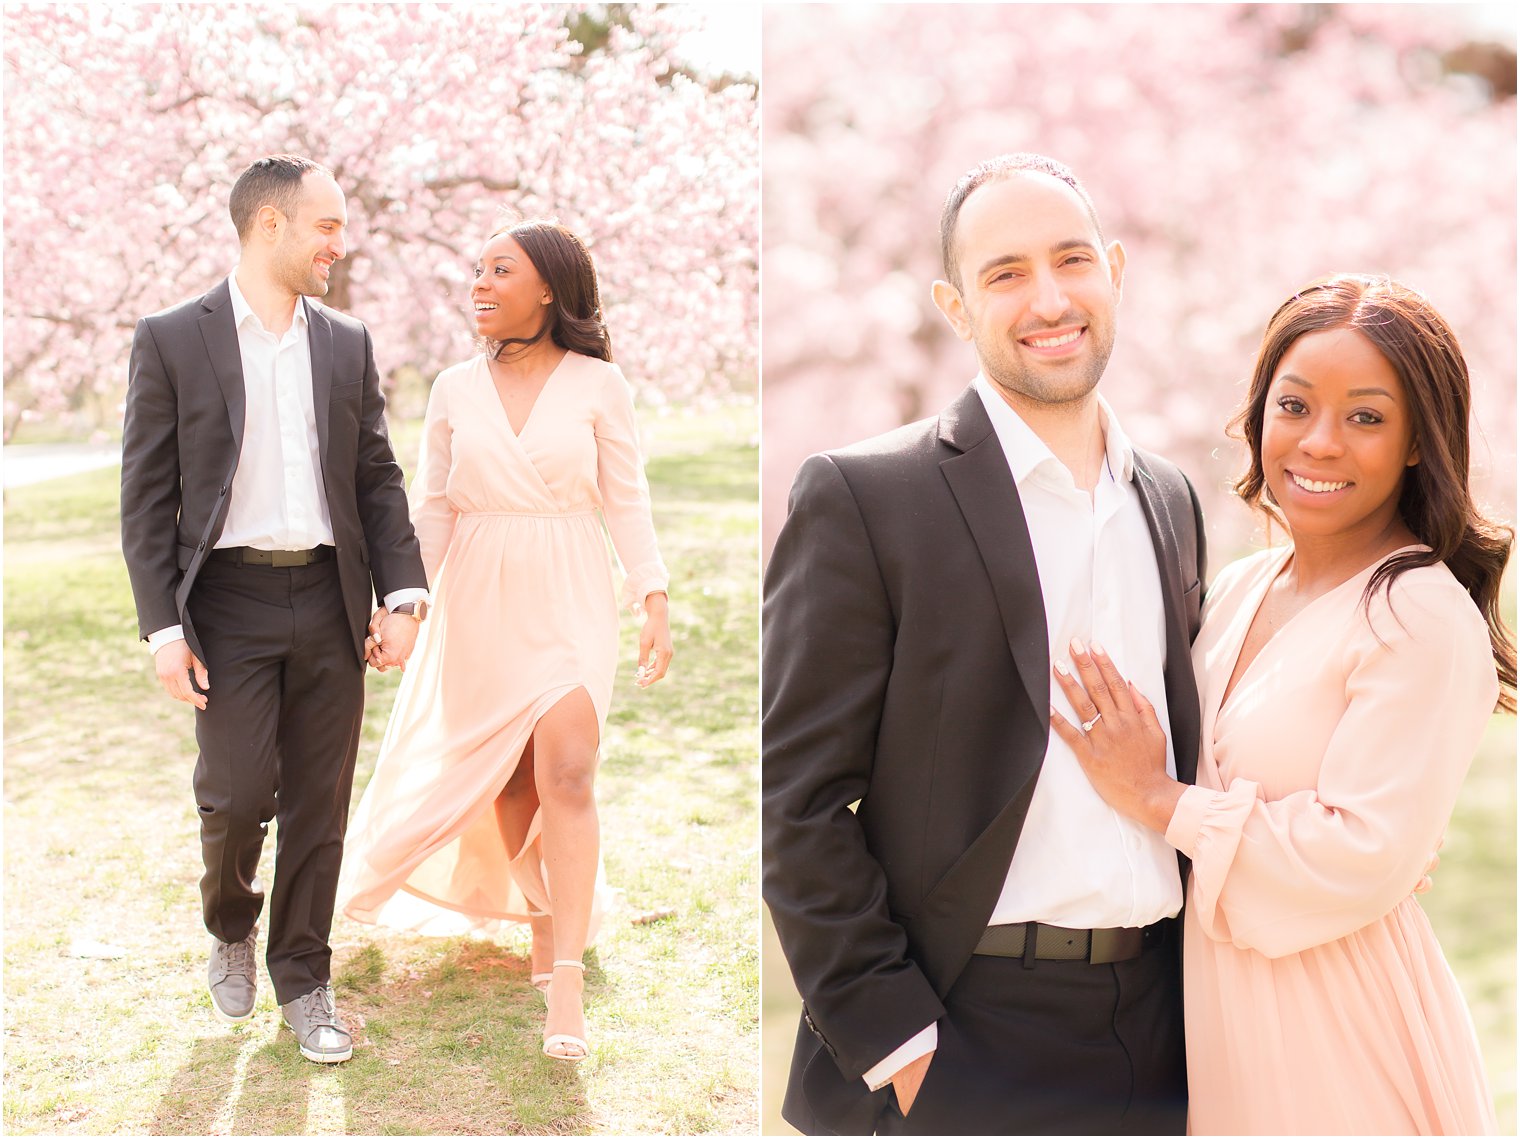 sunny engagement photos with cherry blossoms